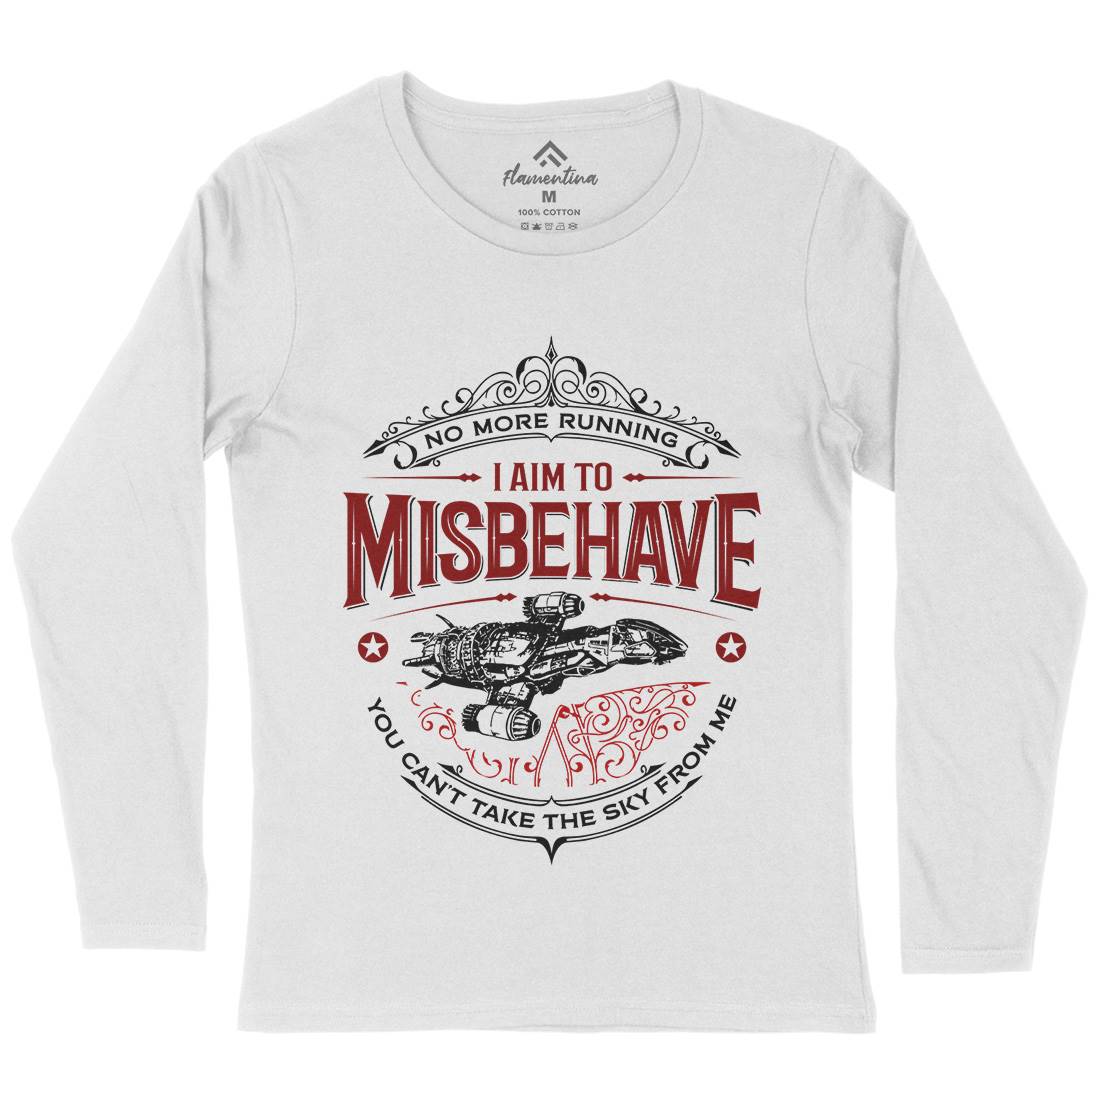 I Aim To Misbehave Womens Long Sleeve T-Shirt Space D435